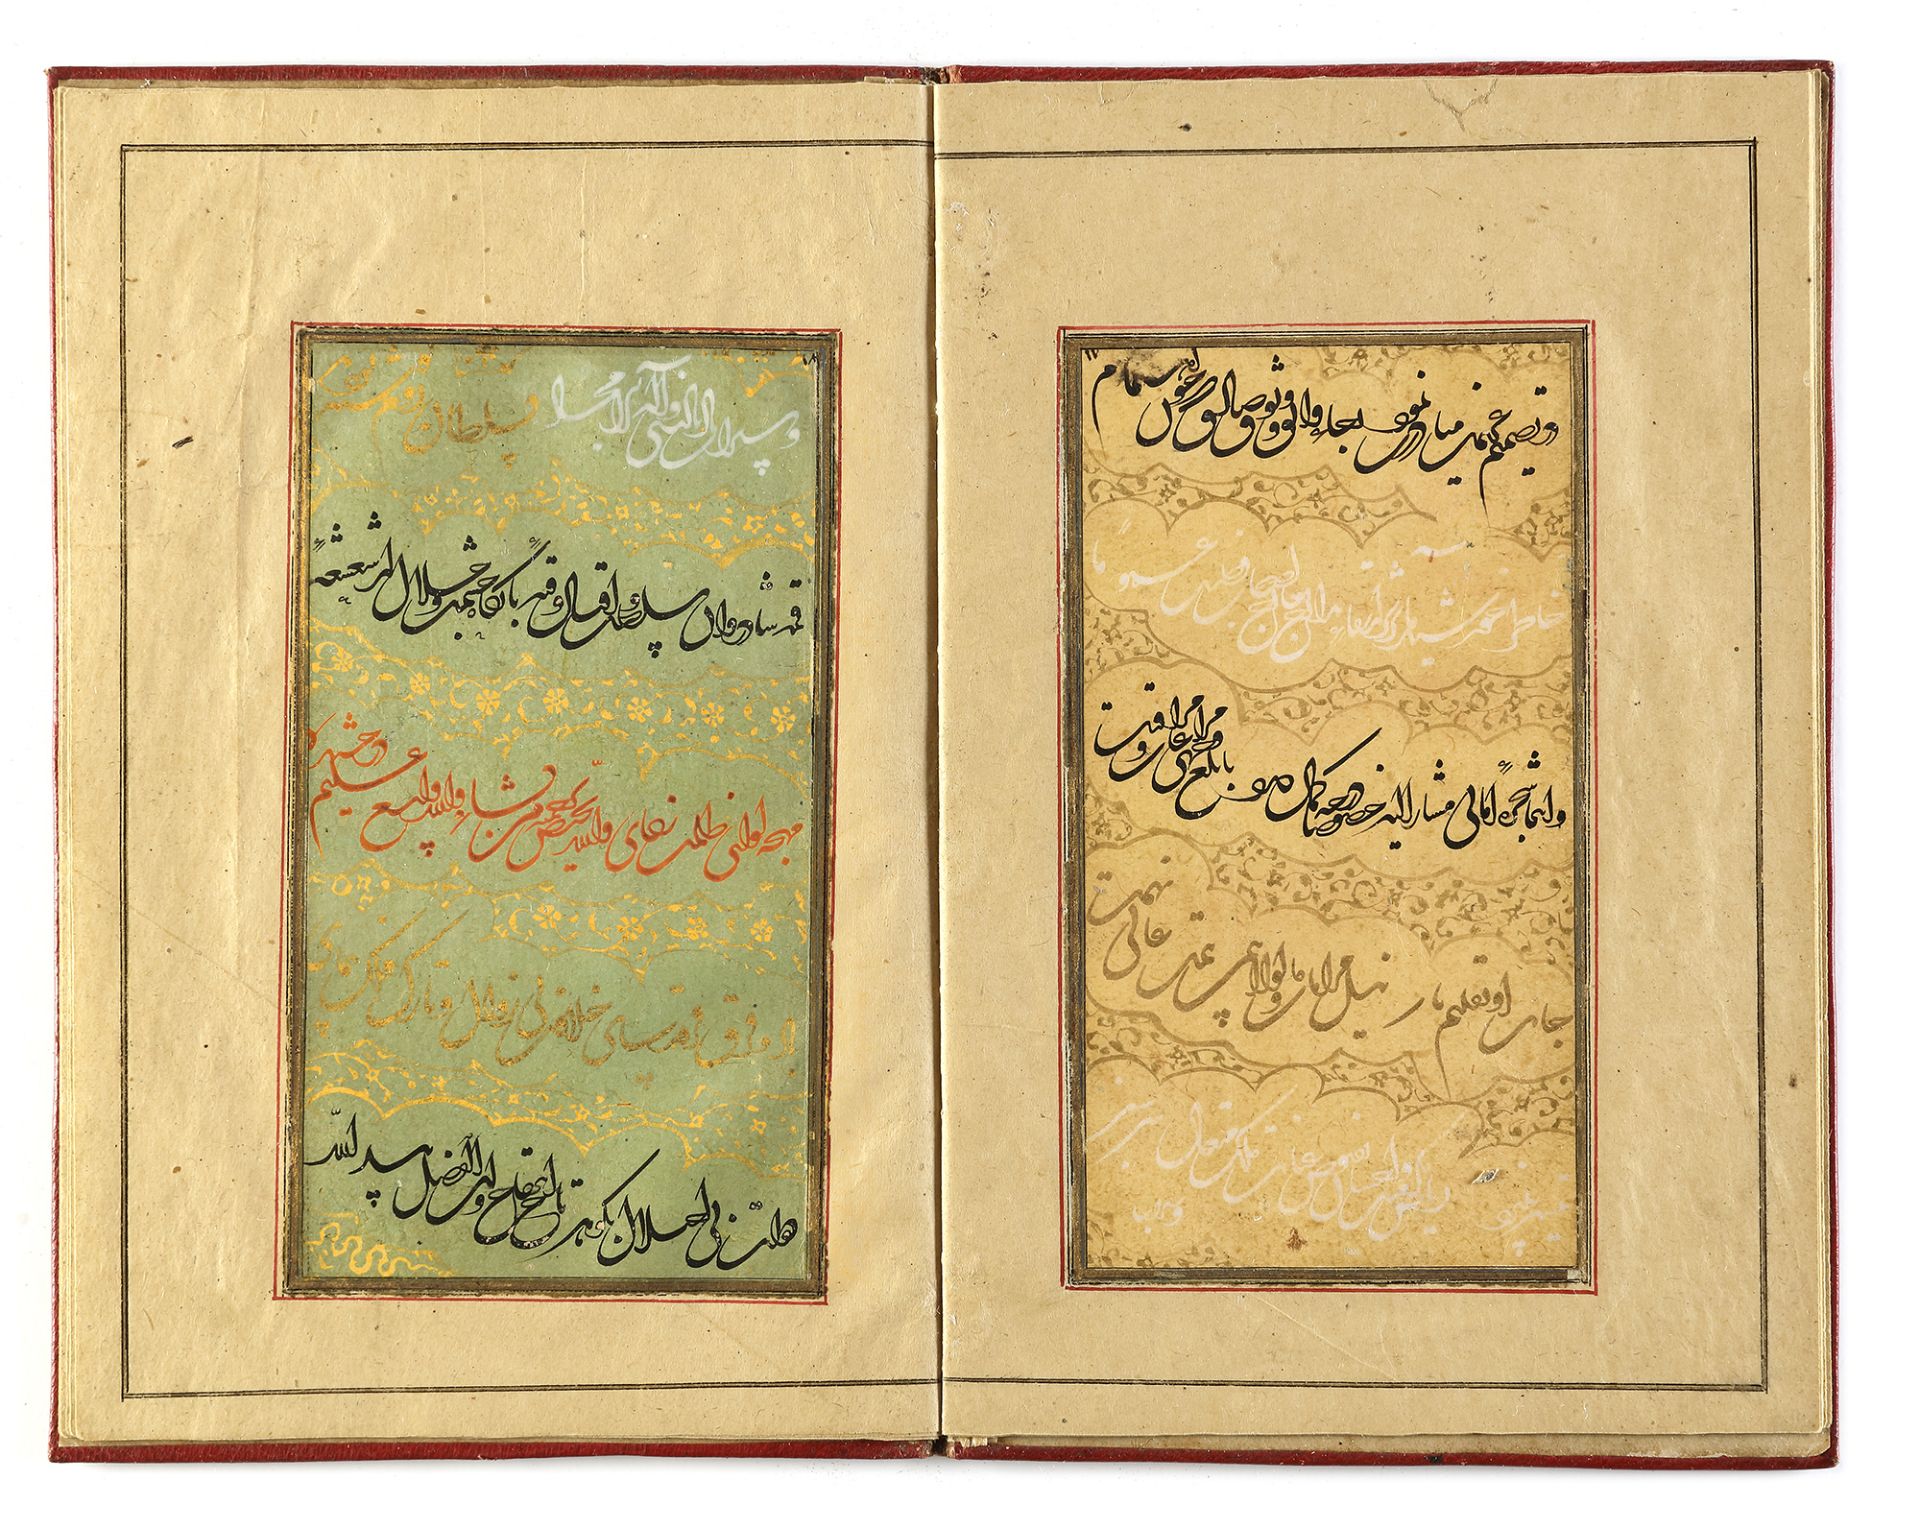 A MANUSCRIPT OF POETRY, SIGNED BY IKHTIYAR AL-MUNSHI, PERSIA, SAVAFID, DATED 975 AH/1567-68 AD - Image 6 of 18